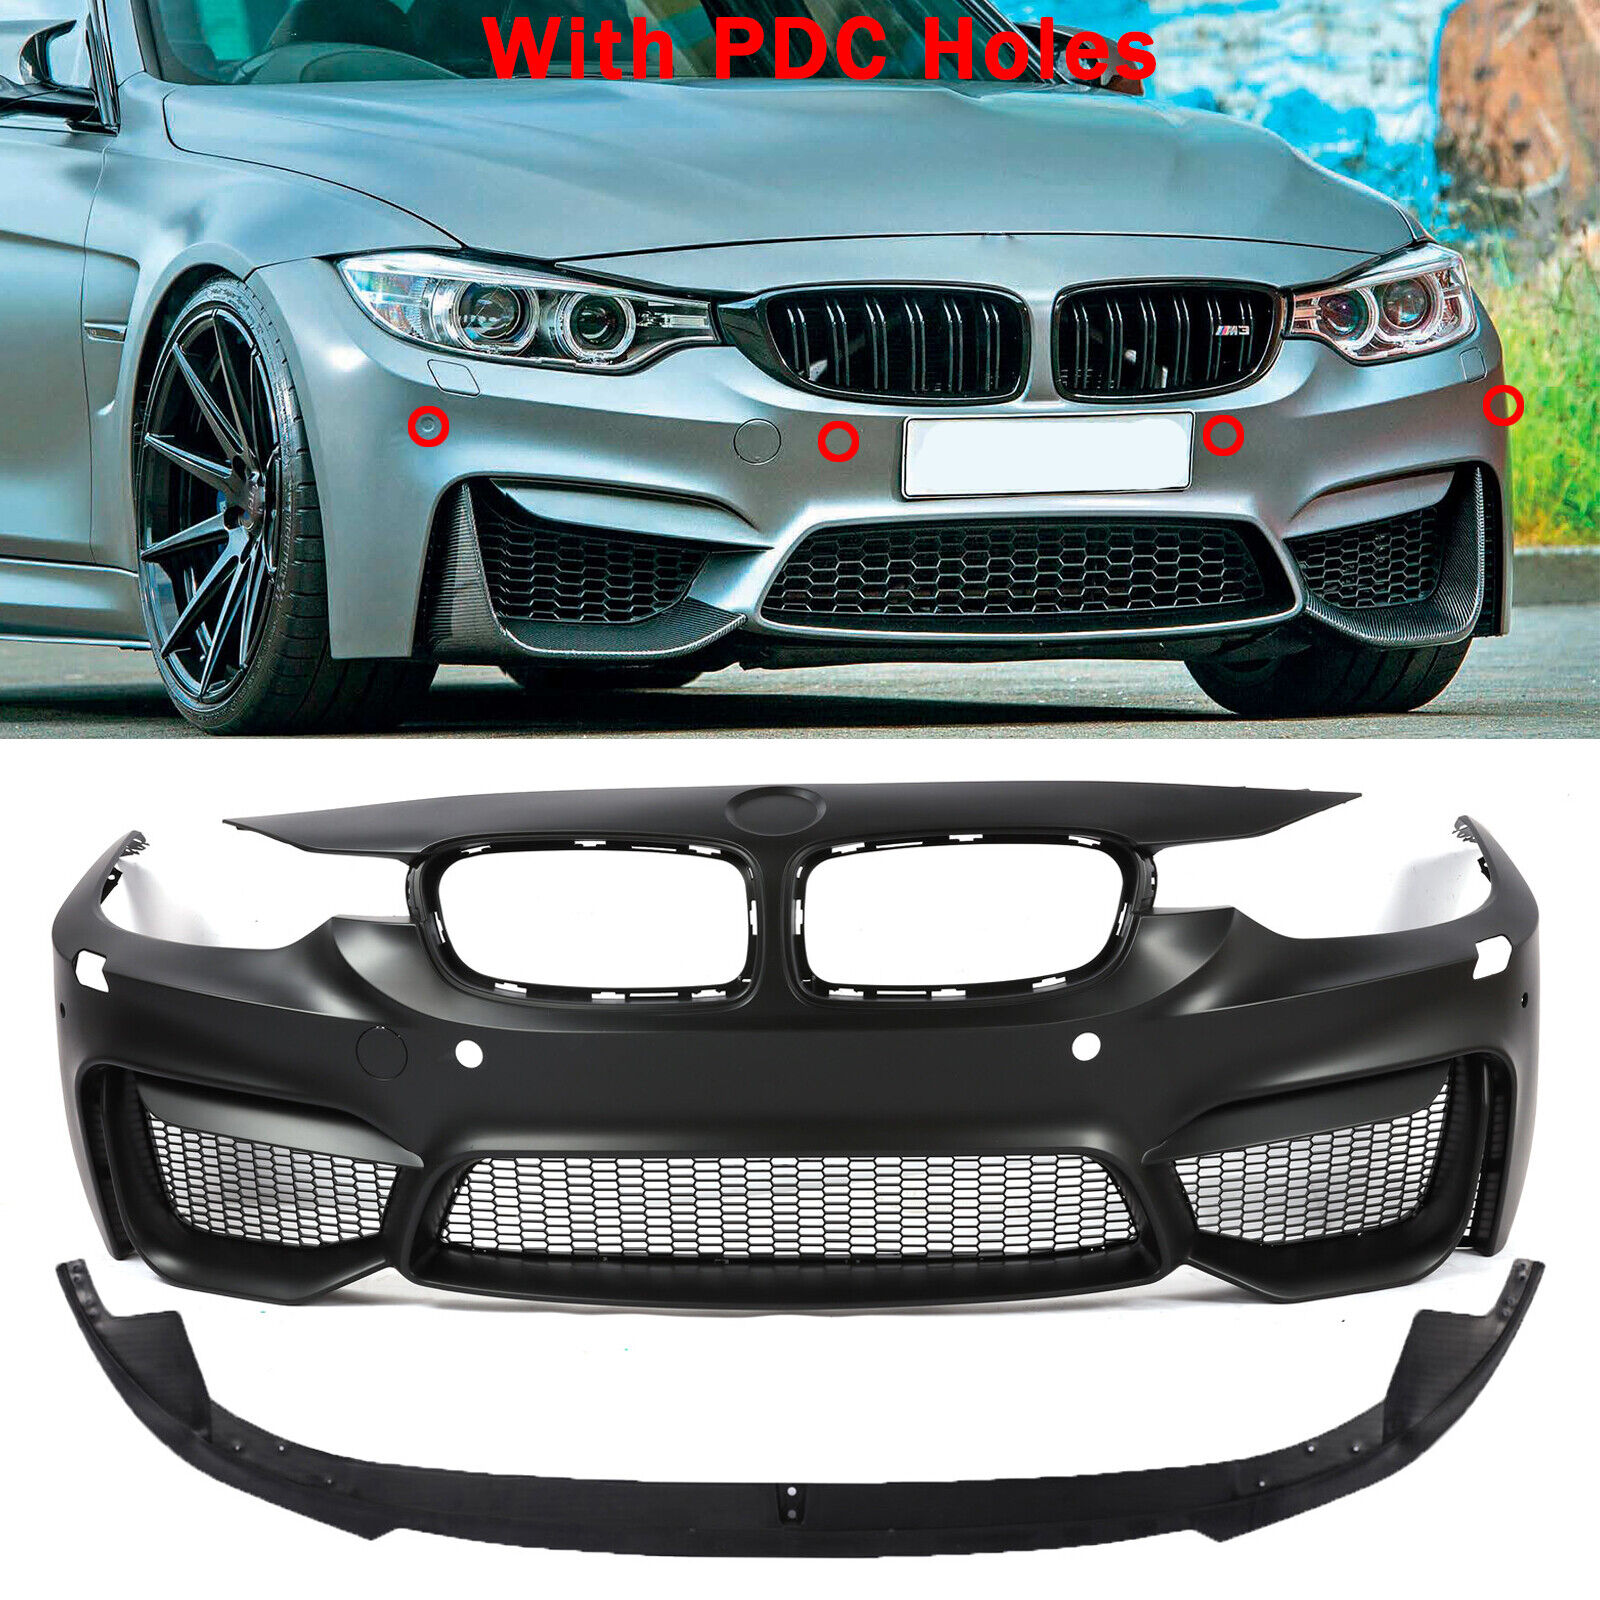 M3 (F80) Style Front Bumper +lip Fit for BMW 3-Series F30 Sedan W/PDC 2012-2018